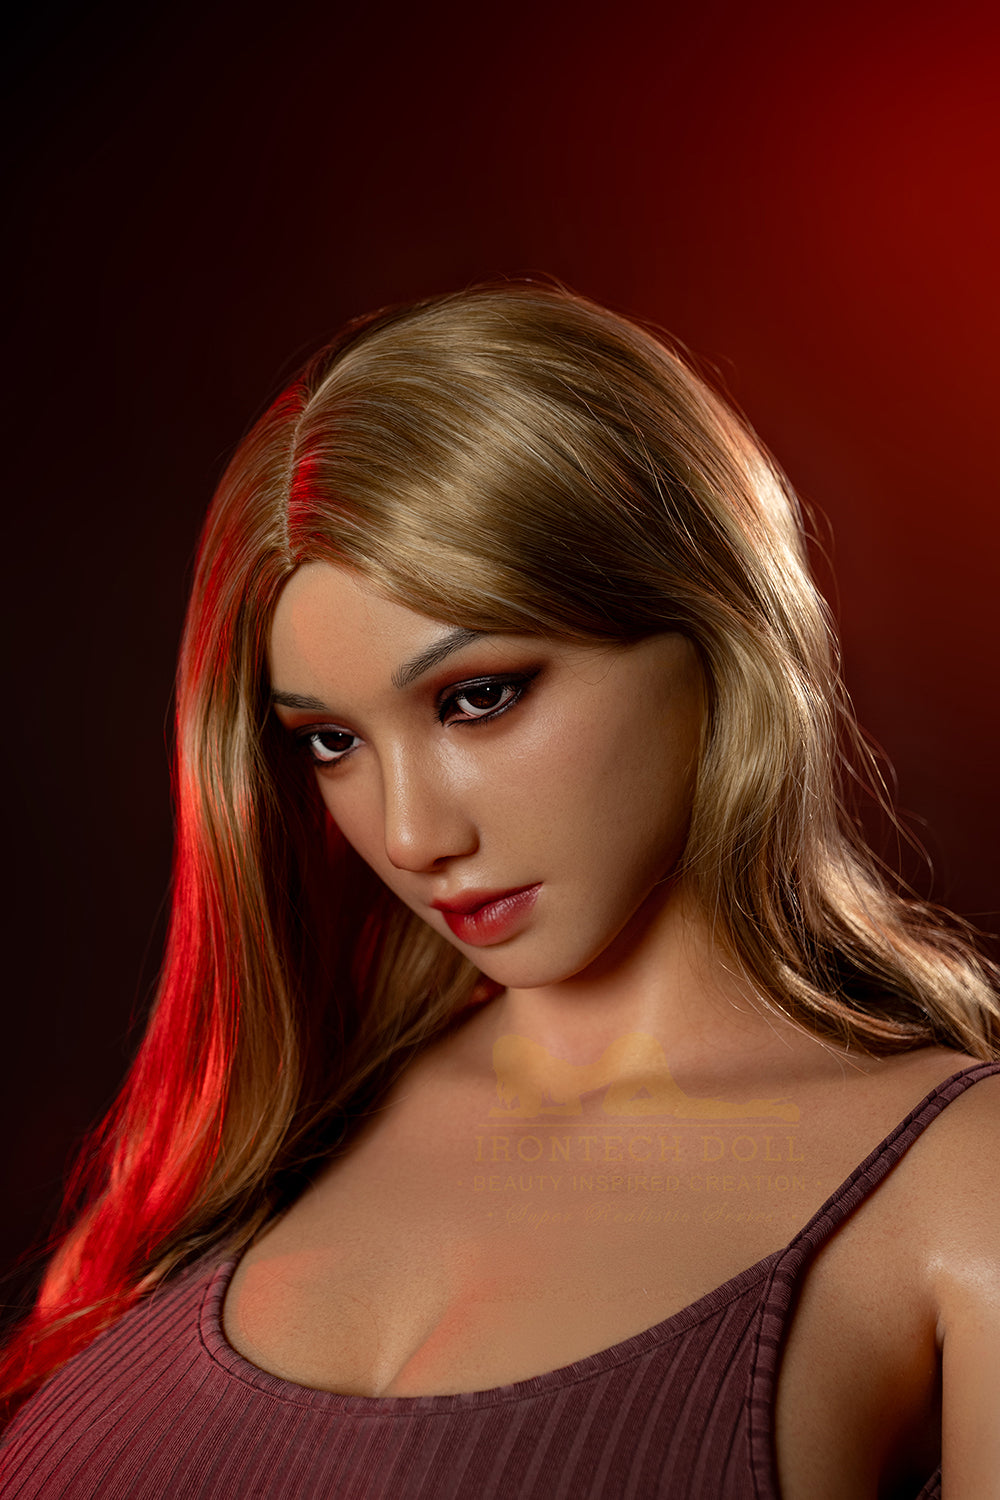 Irontechdoll Bexie 160cm S30 Realistic Full Silicone Sex Doll Tanned Skin Sexy Lady Adult Love Doll